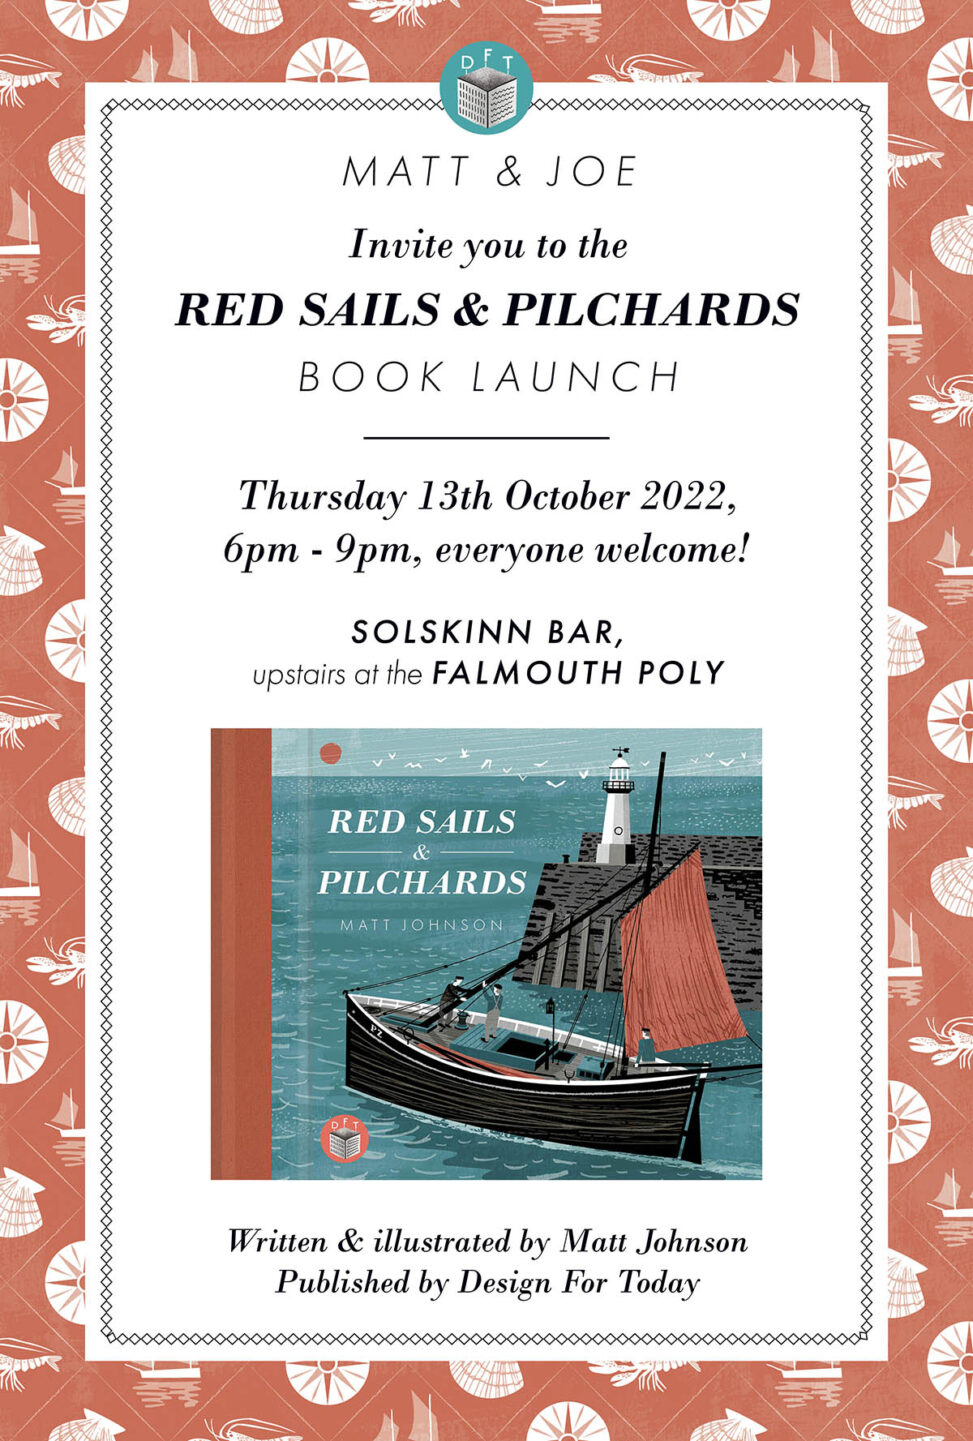 Matt & Joe invite you to the "Red Sails & Pilchards" book launch. Thursday 13th October 2022, 6pm - 9pm, everyone welcome! Solskinn Bar, upstairs at the Falmouth Poly. "Red Sails & Pilchards" written and illustrated by Matt Johnson, published by Design for Today